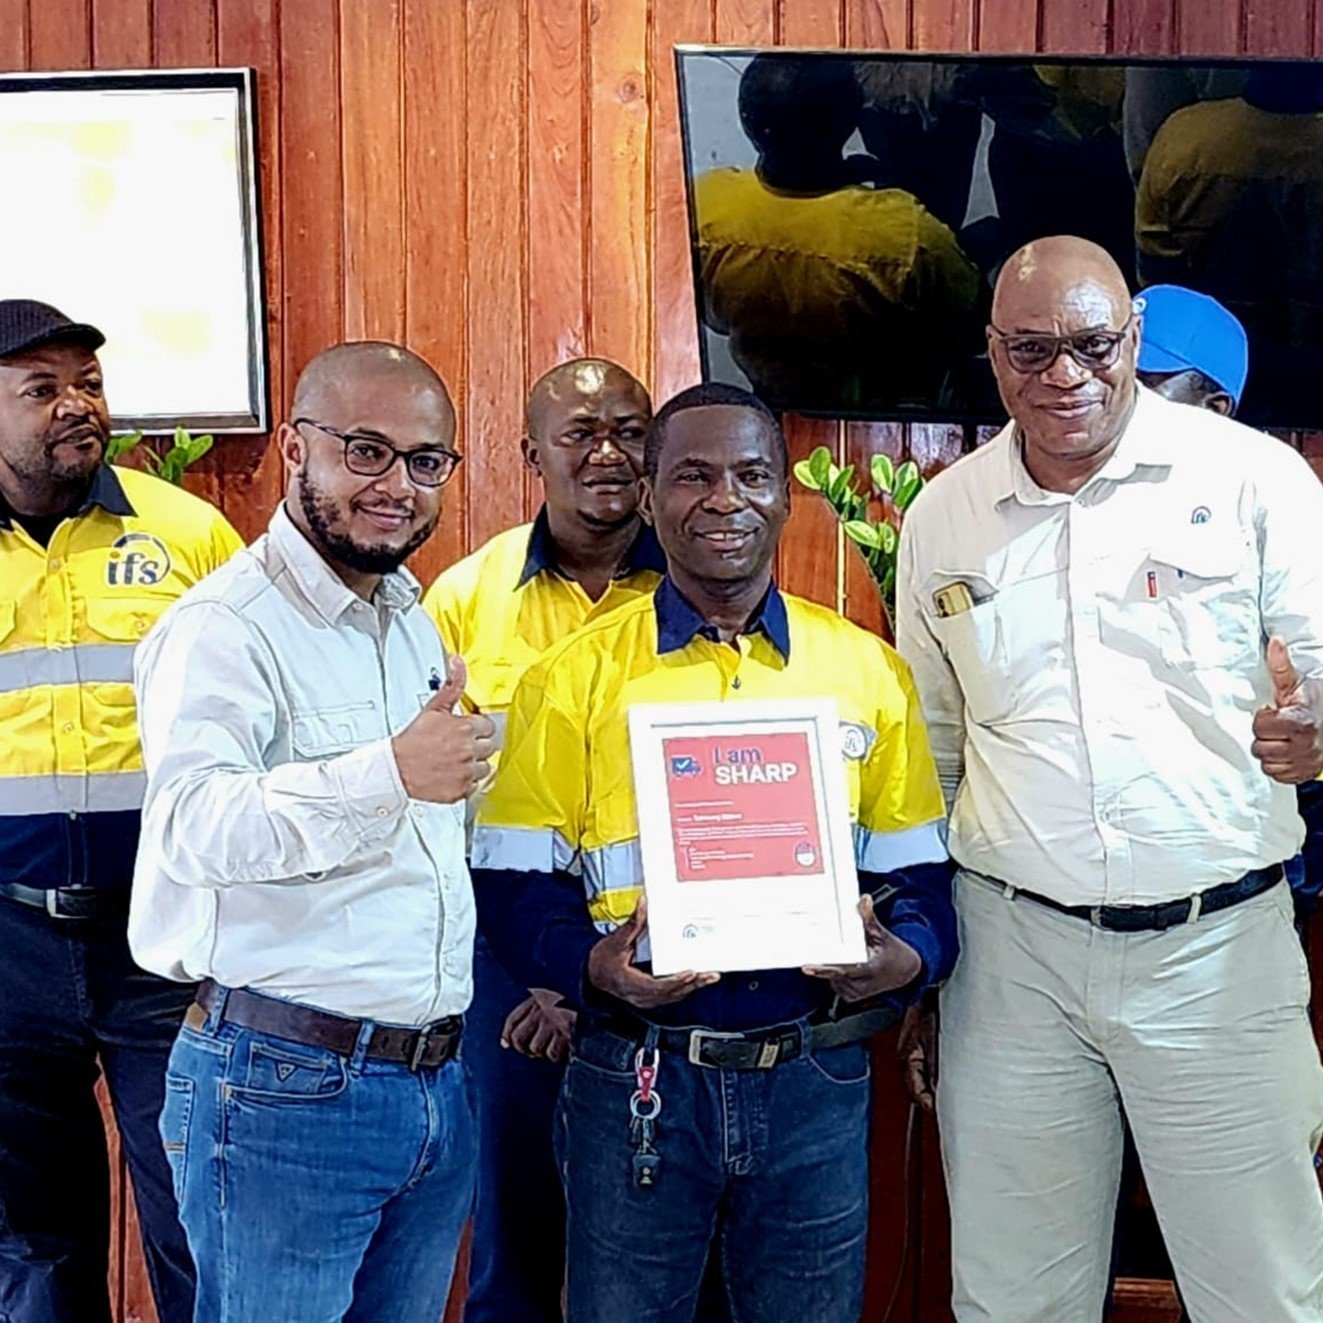 Safety is a way of life at IFS. Our focus on incident prevention is core to making our workplaces safe.
ㅤ
We have developed the &ldquo;I am SHARP&rdquo; Driver Programme which places emphasis on safe driving tactics to avoid and prevent accidents.
ㅤ
